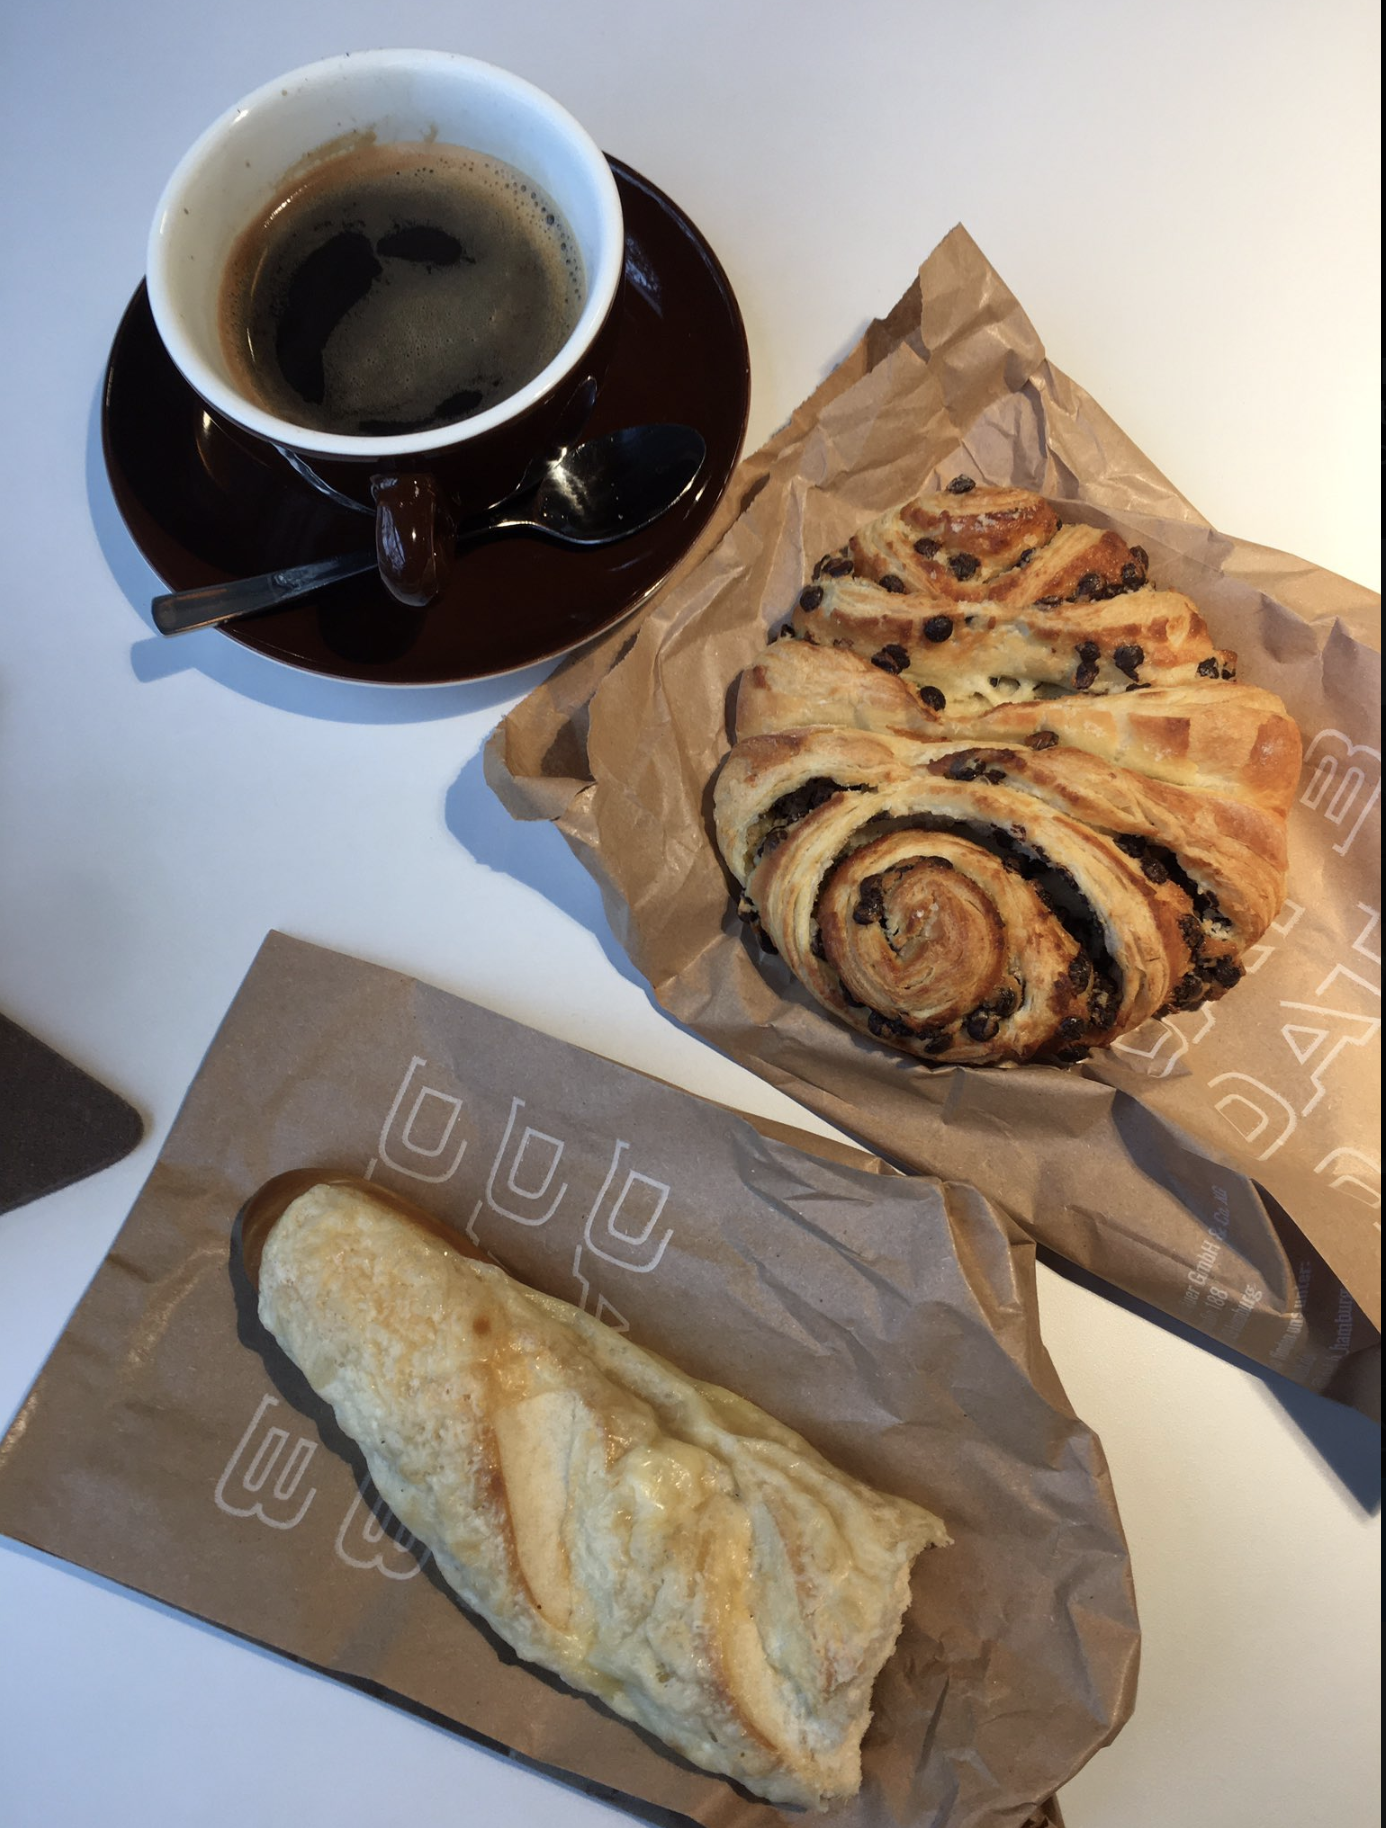 A cup of black coffee sitting on a black saucer and a chocolate filled pastry and half a cheese pastry. The pastries sit on paper bags